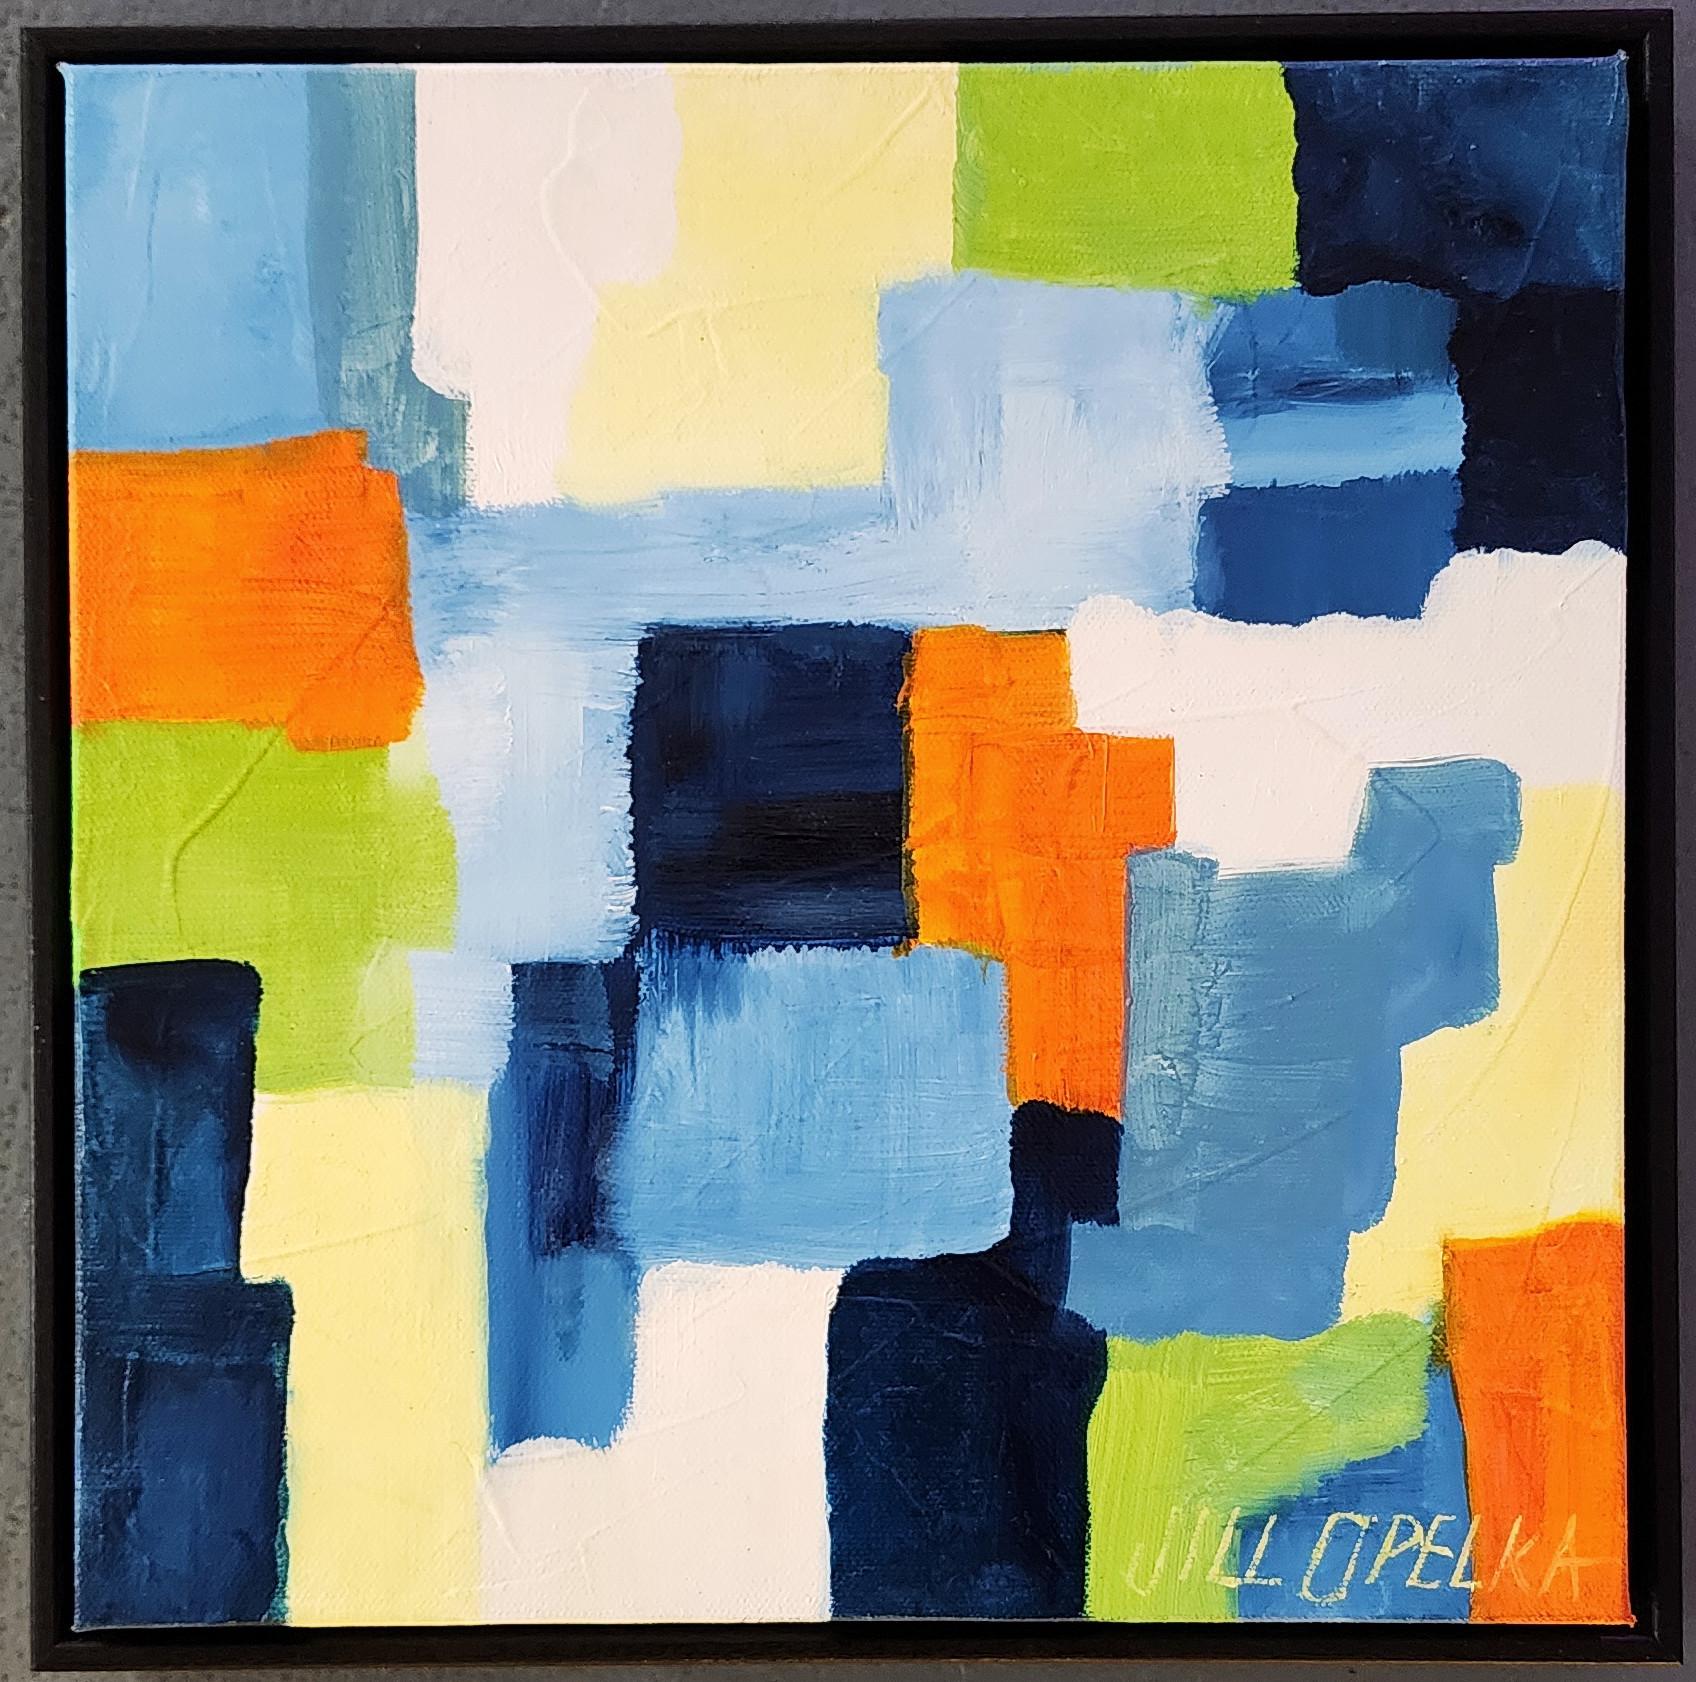 Abstract II (Abstract, Vibrant, Deep, Blue, Navy, Green, Orange, 25% OFF) - Contemporary Painting by Jill Opelka